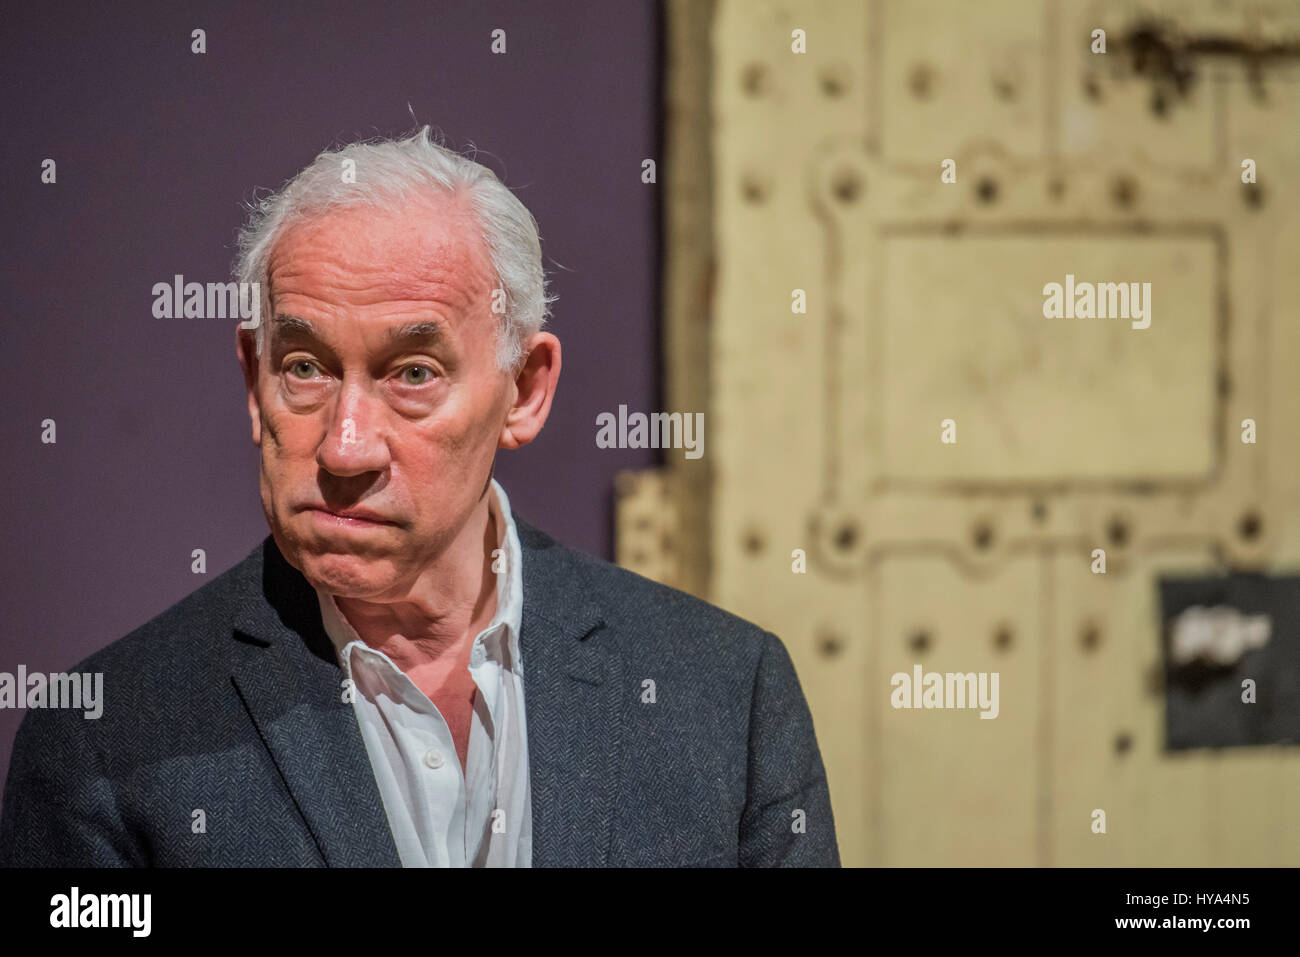 London, UK. 3rd Apr, 2017. Simon Callow with the door of Oscar Wilde's prison cell (no. C.3.3) at Reading jail - Queer British Art 1861-1967 a new exhibition at Tate Britain marks the 50th anniversary of partial decriminalisation of male homosexuality in England and Wales. Spanning the playful to the political, the explicit to the domestic, Queer British Art 1861-1967 showcases the rich diversity of queer visual art and its role in society. Credit: Guy Bell/Alamy Live News Stock Photo